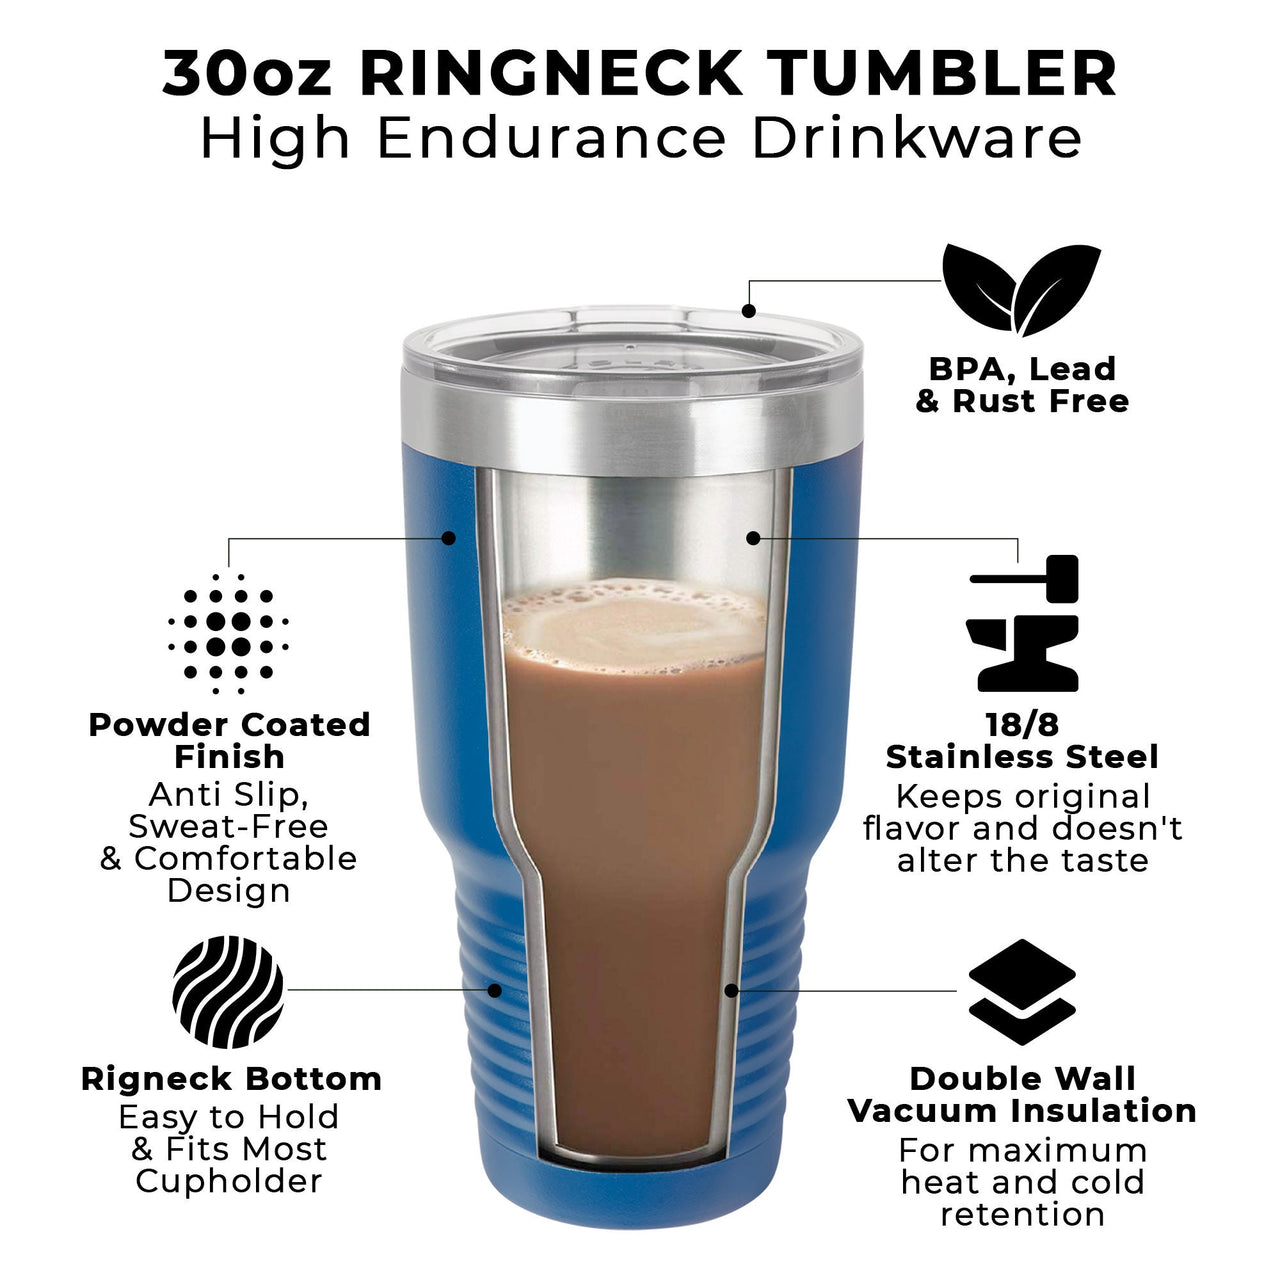 There is Always Time For Hunting Tumbler Gift For Hunters | Hunting Tumbler Gifts For Men | Engraved Hunting Cups | Insulated Tumblers